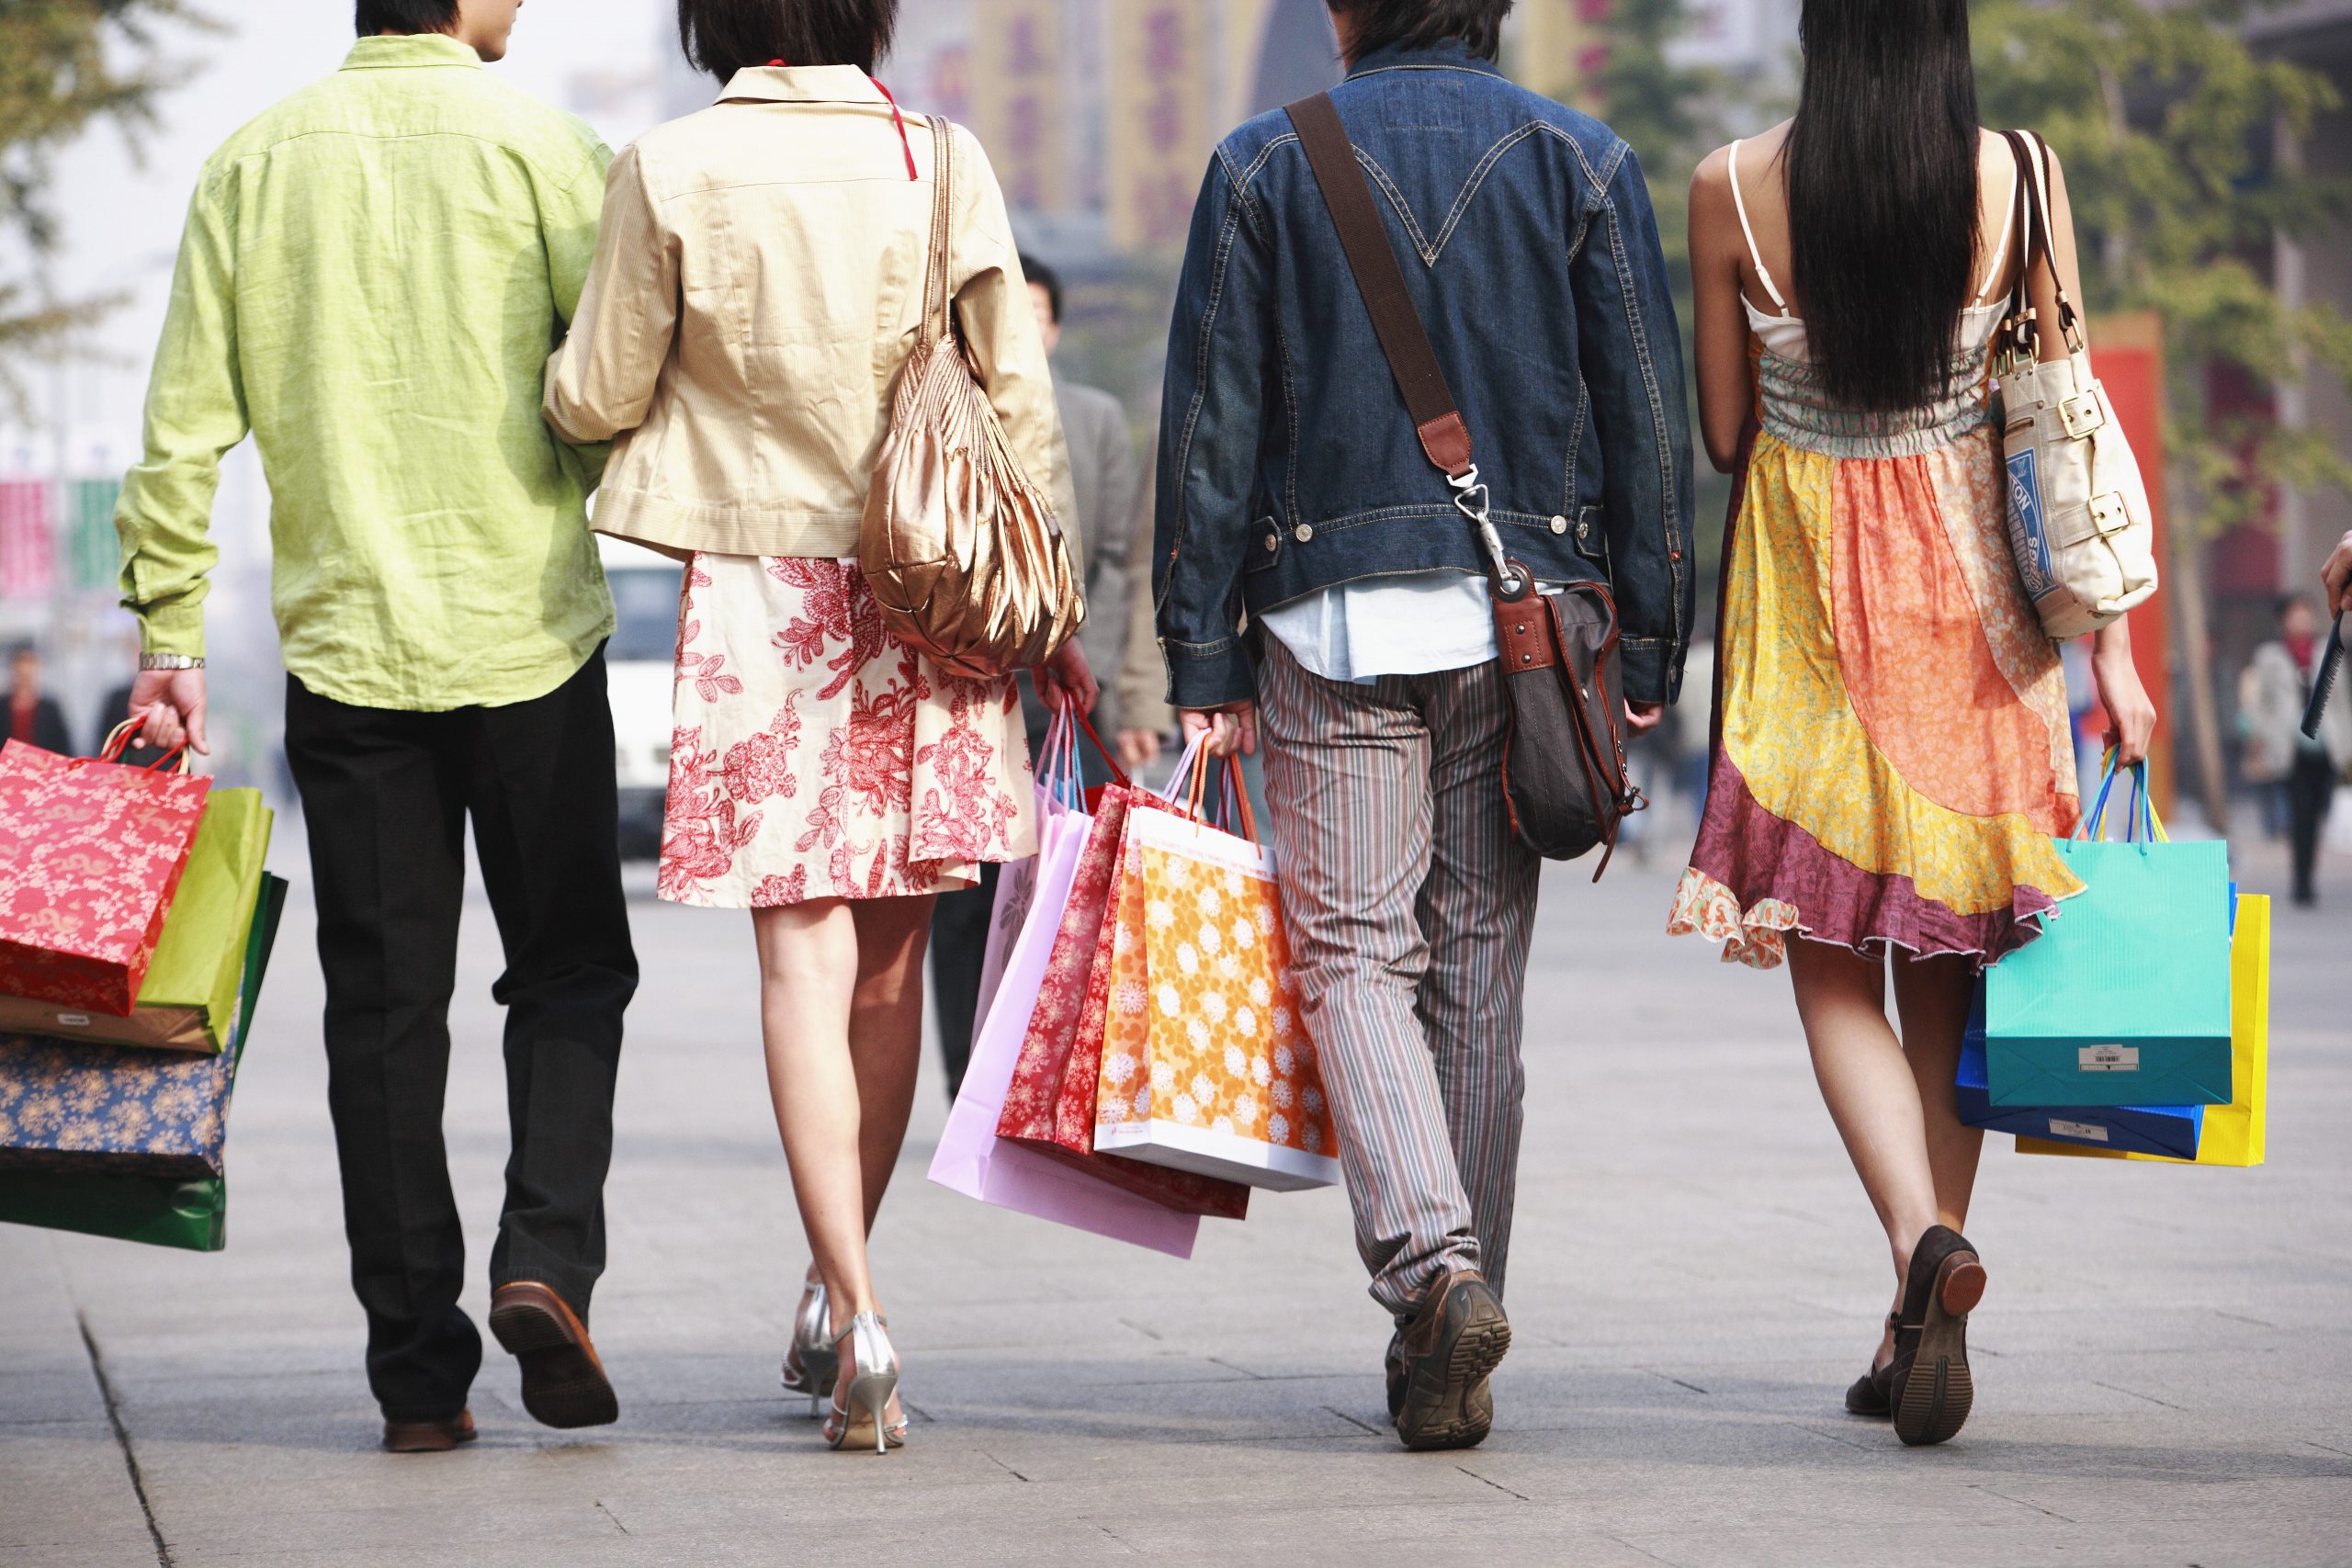 Another way of discovering Spain: Shopping tourism